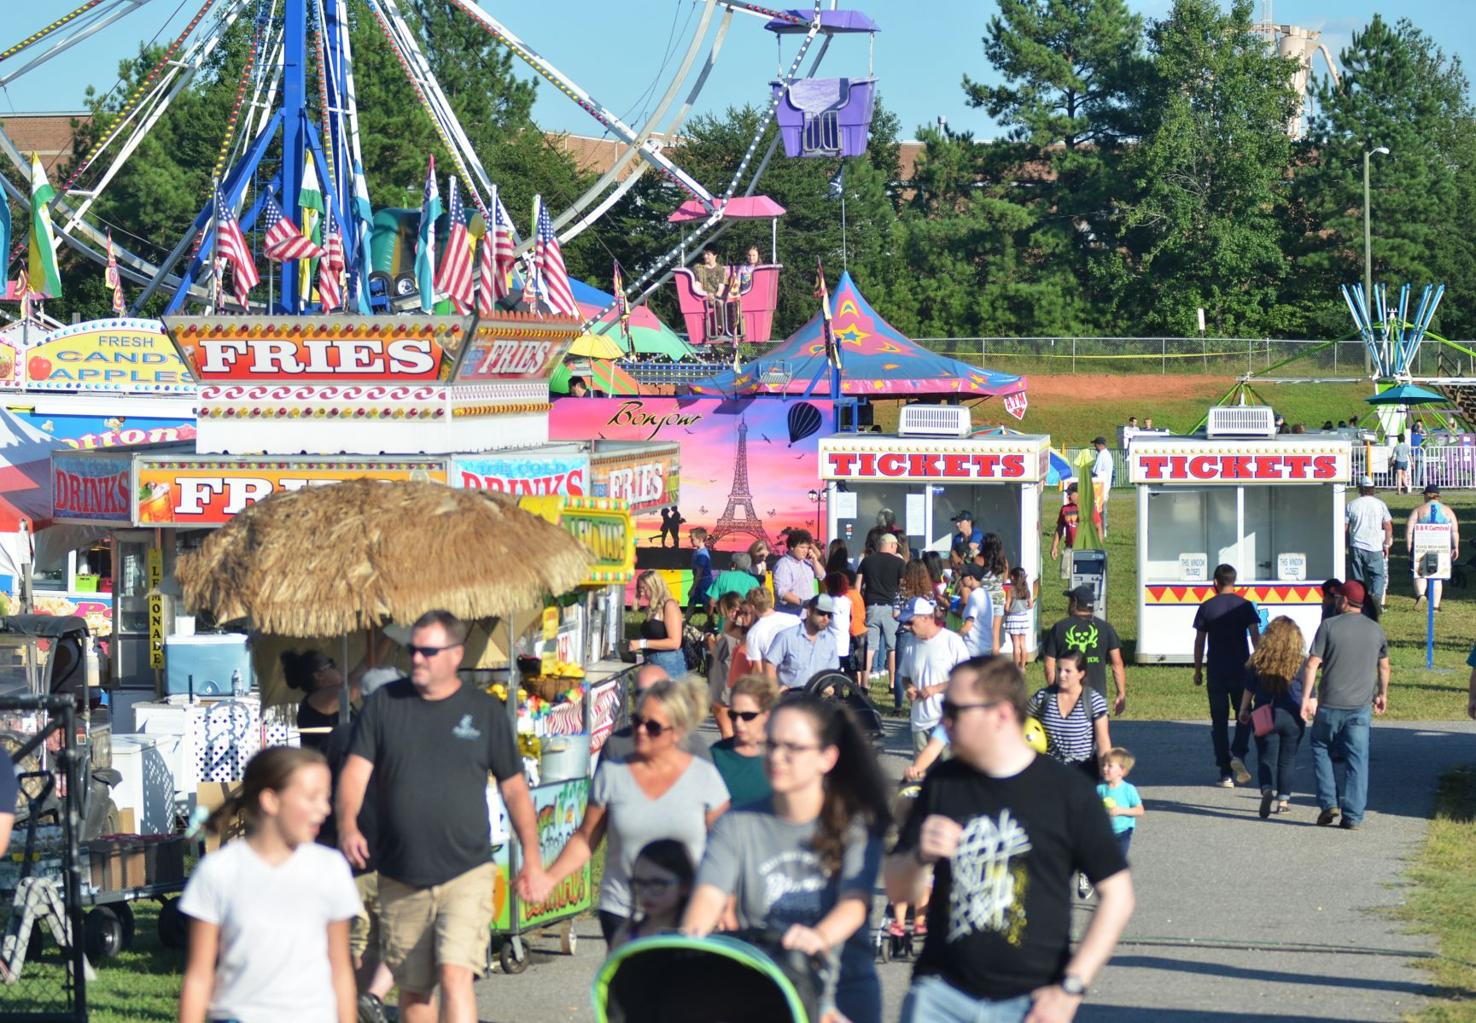 PHOTOS Saturday at the Iredell County Agricultural Fair